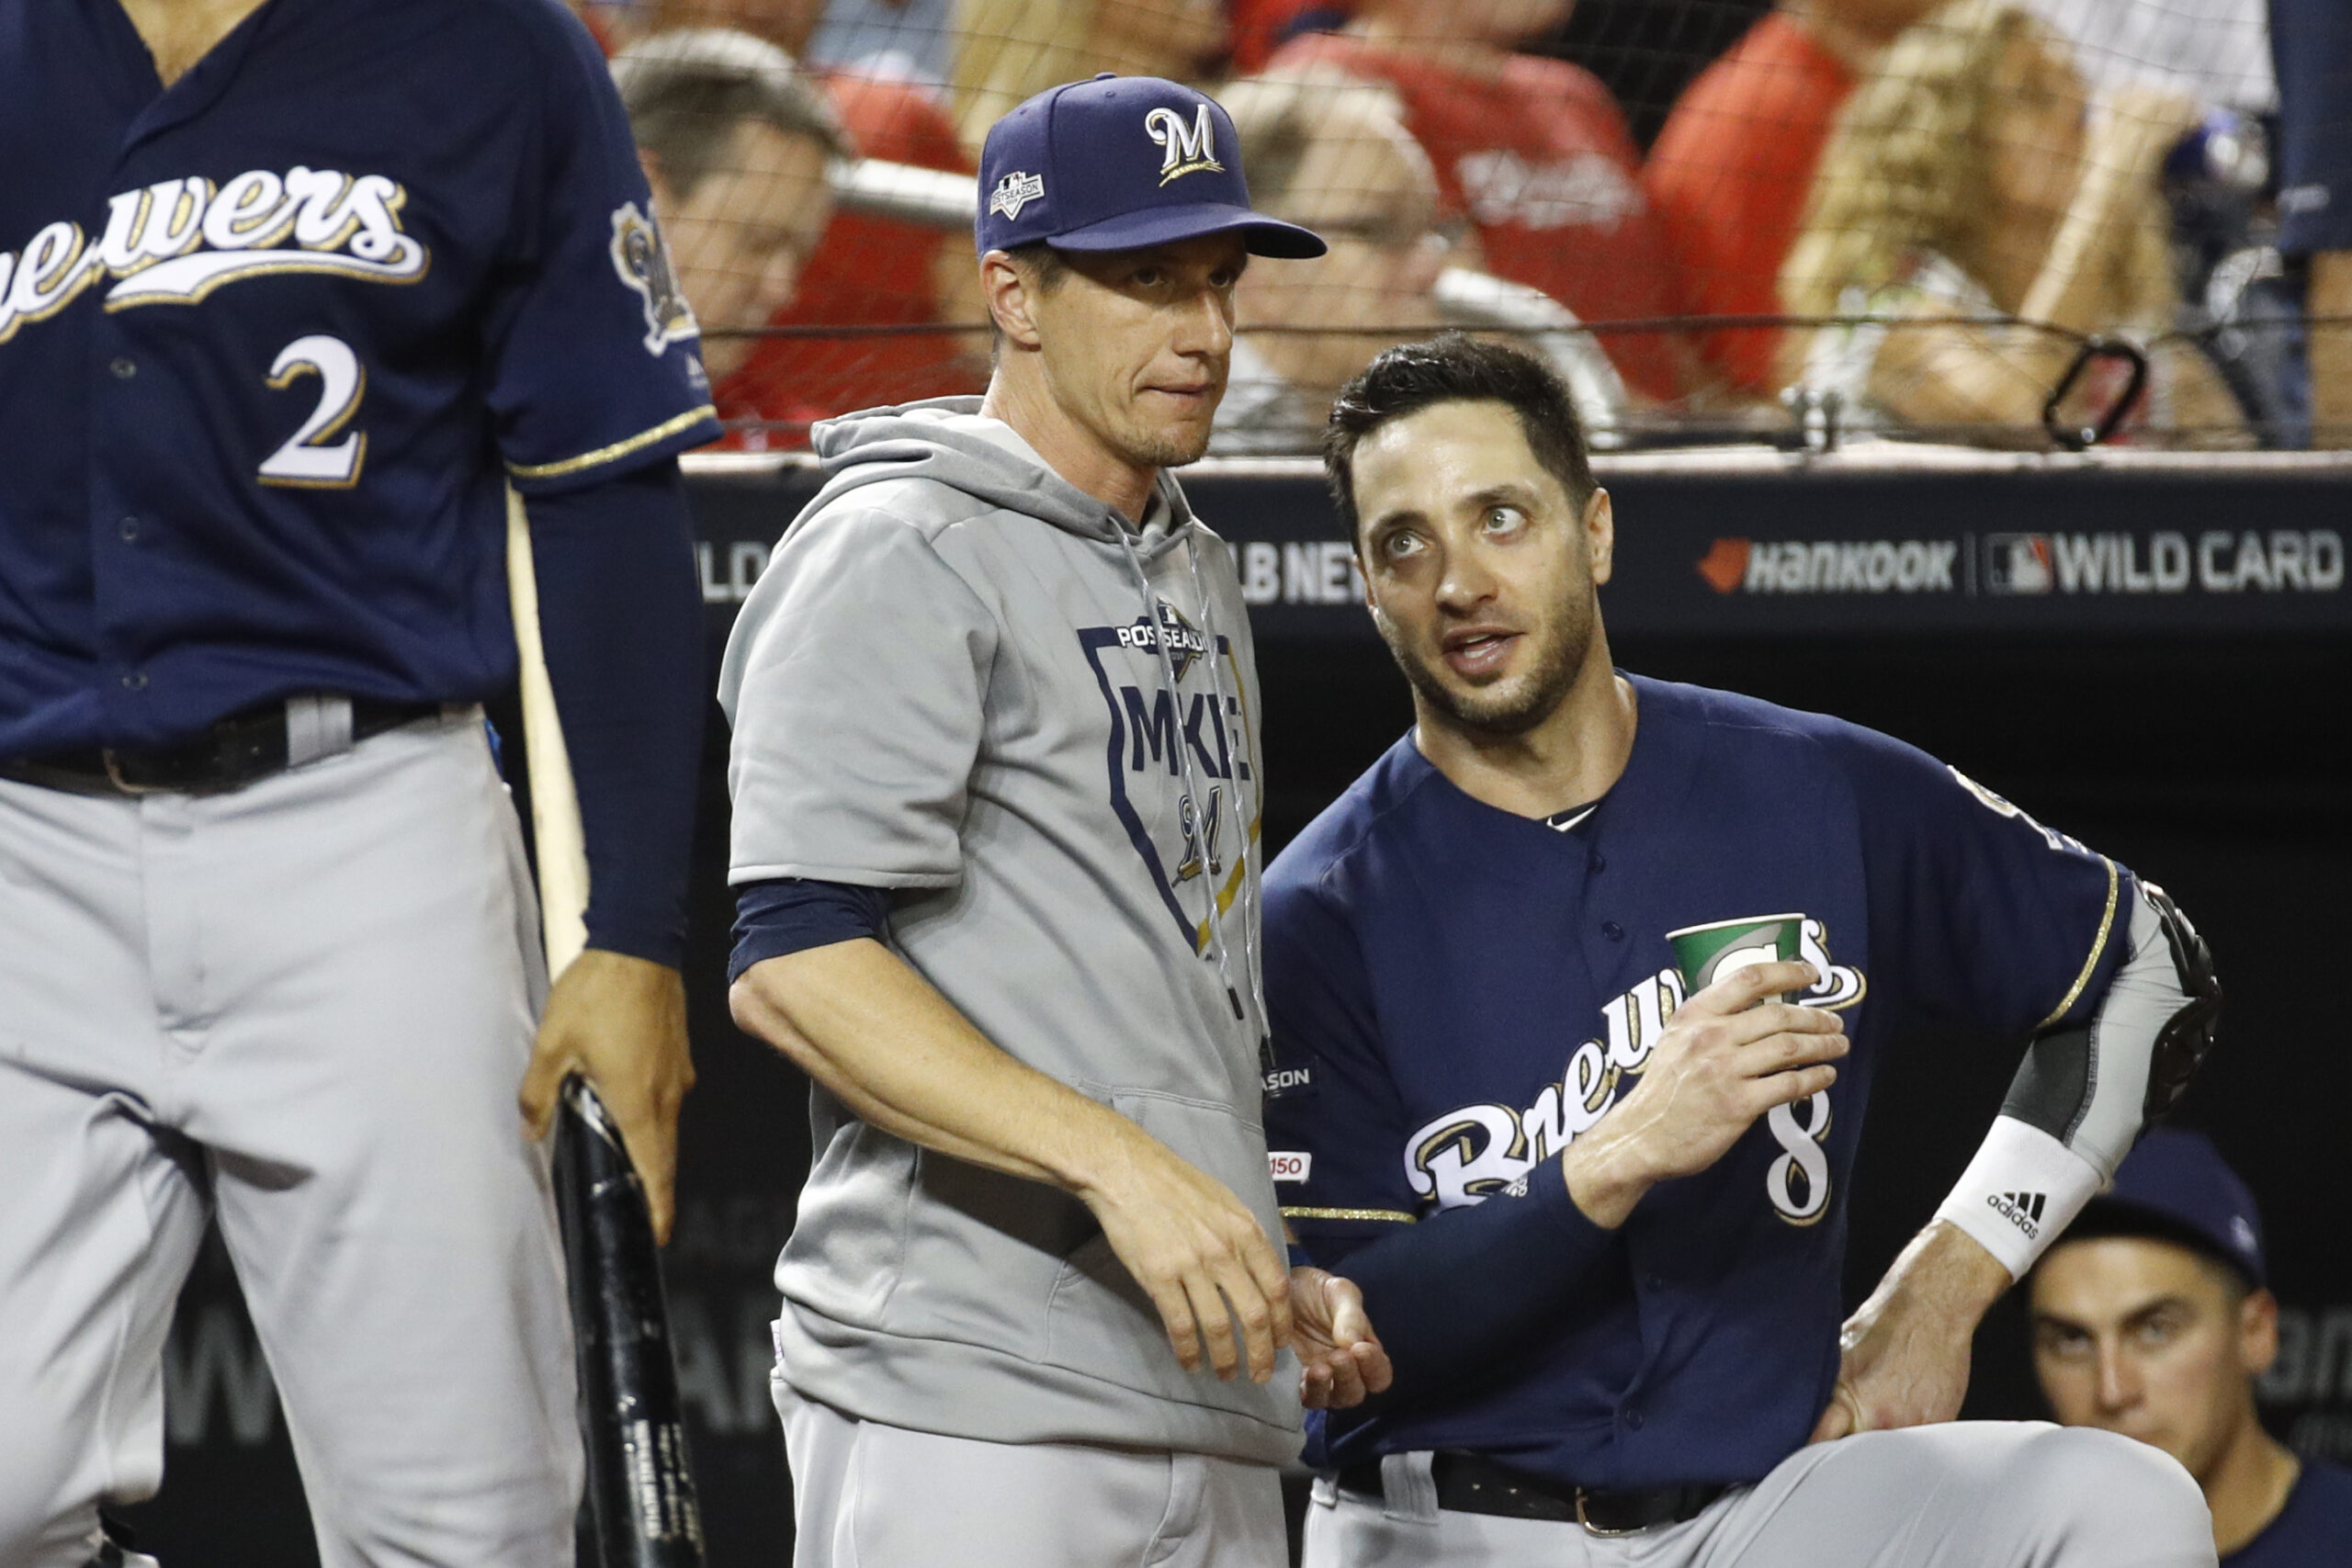 Milwaukee Brewers manager Craig Counsell, center, speaks with left fielder Ryan Braun, right